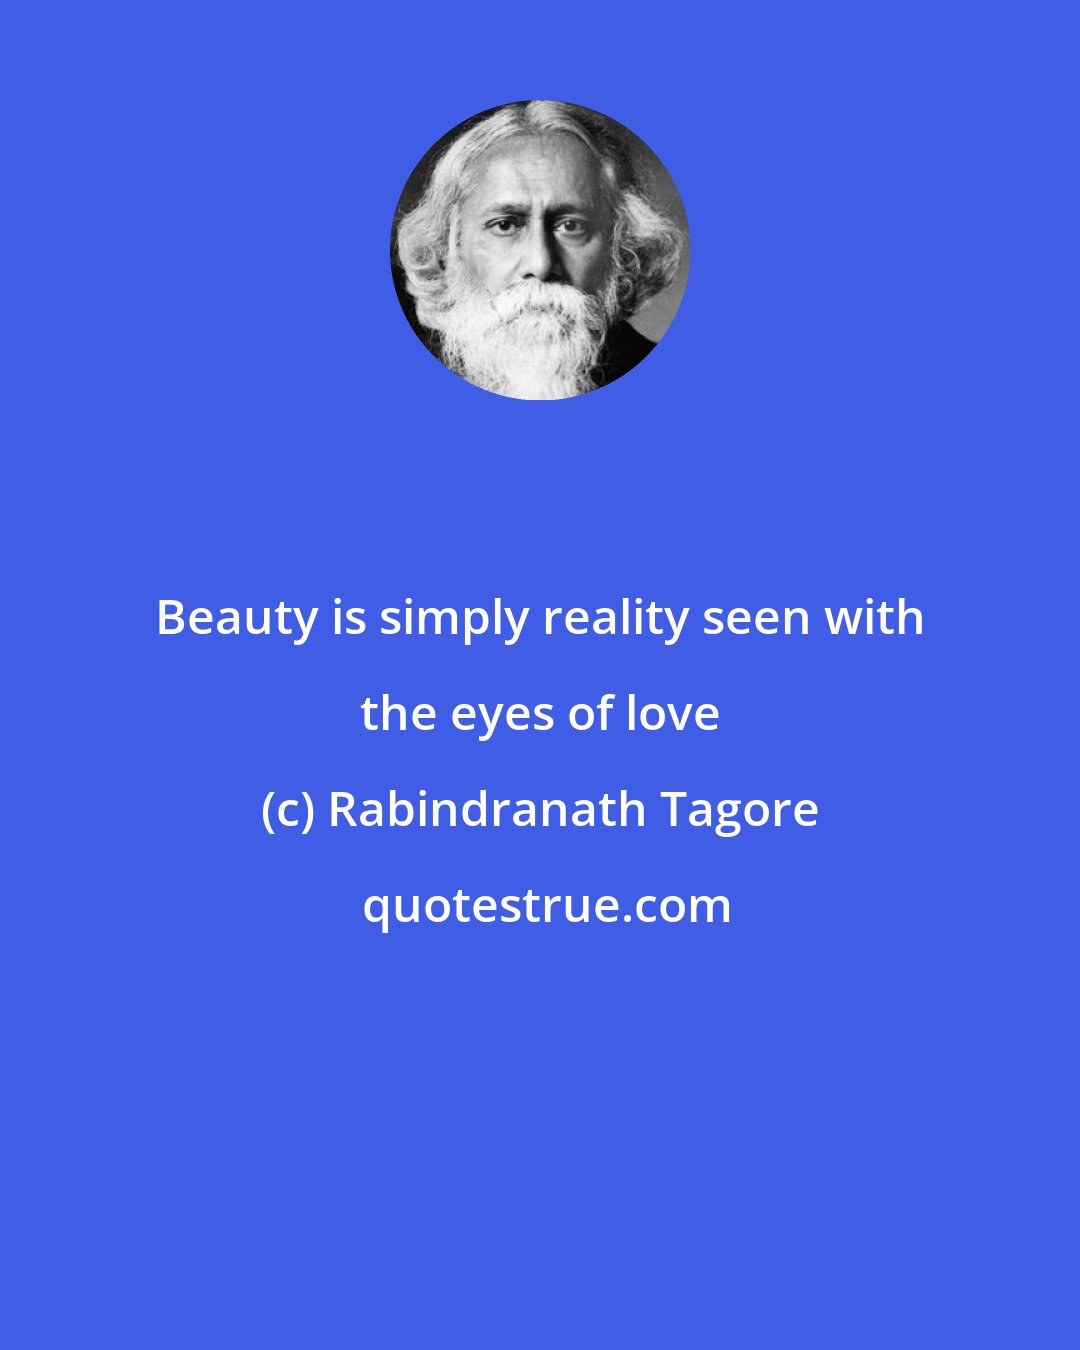 Rabindranath Tagore: Beauty is simply reality seen with the eyes of love